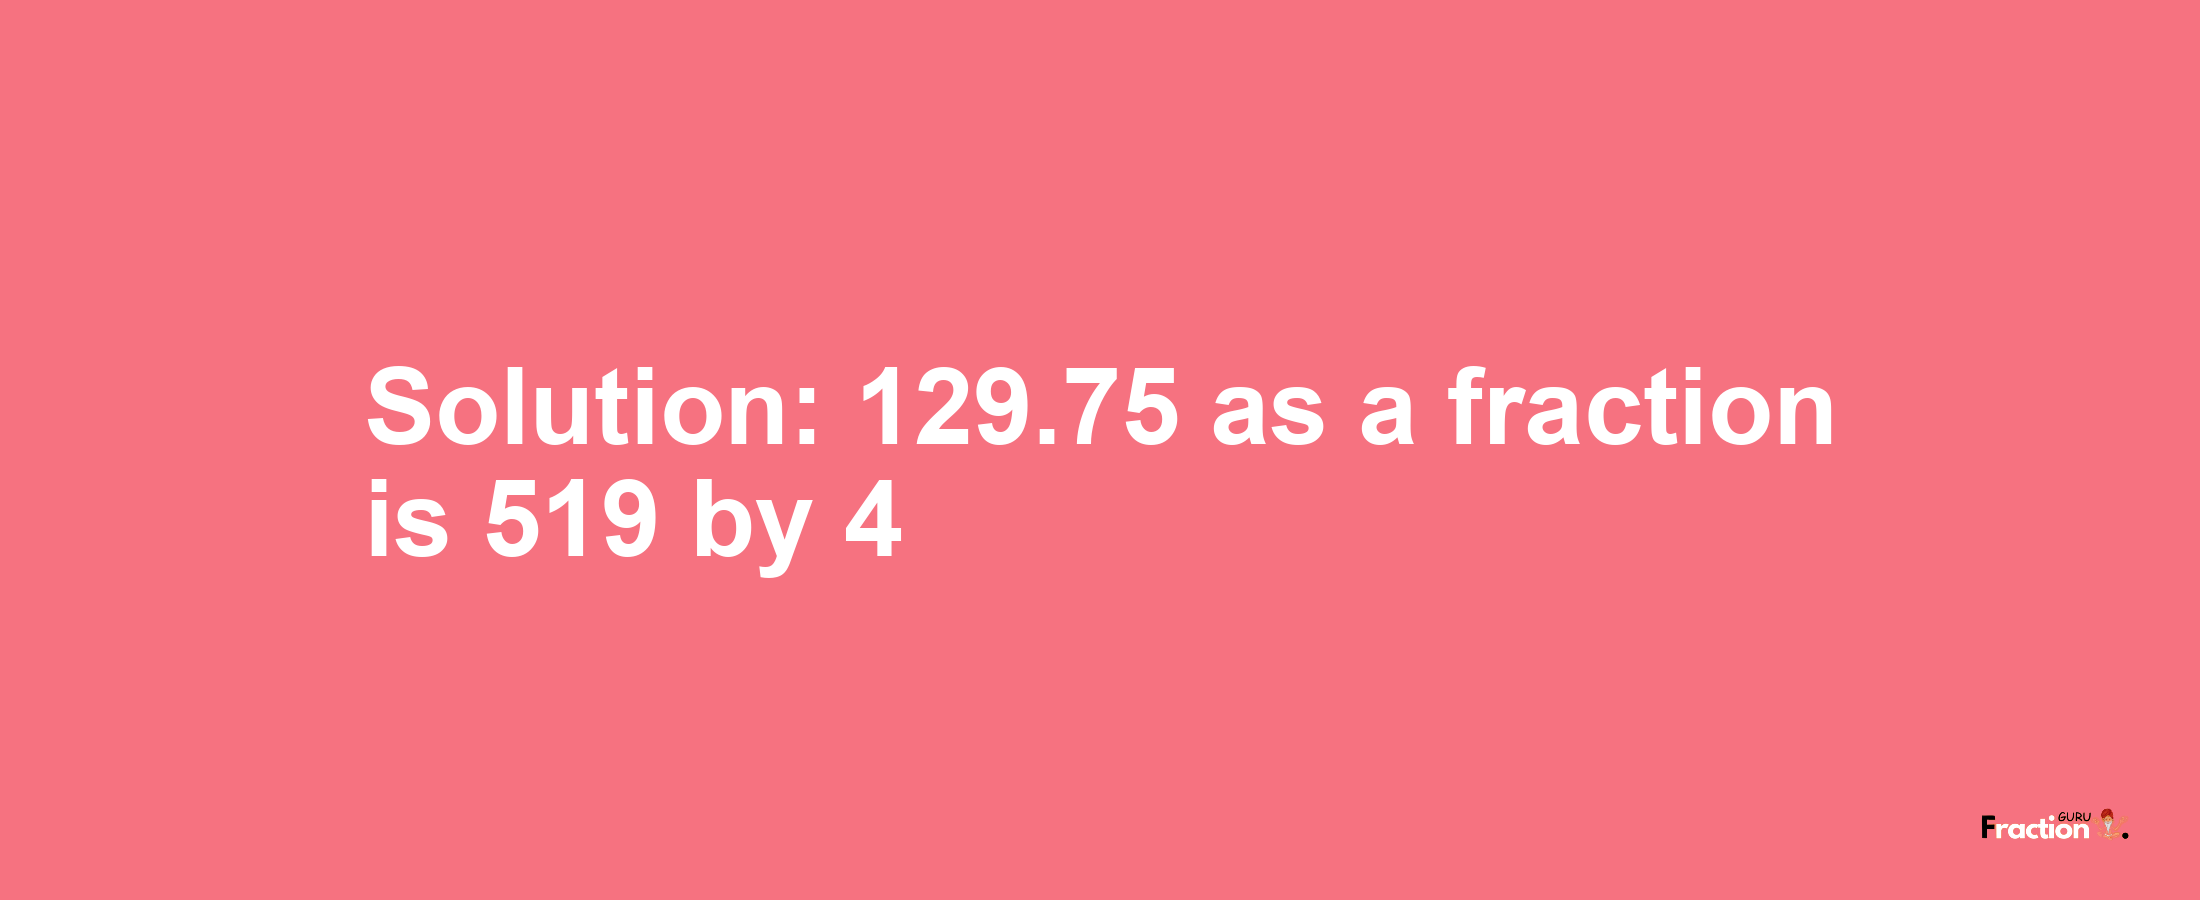 Solution:129.75 as a fraction is 519/4